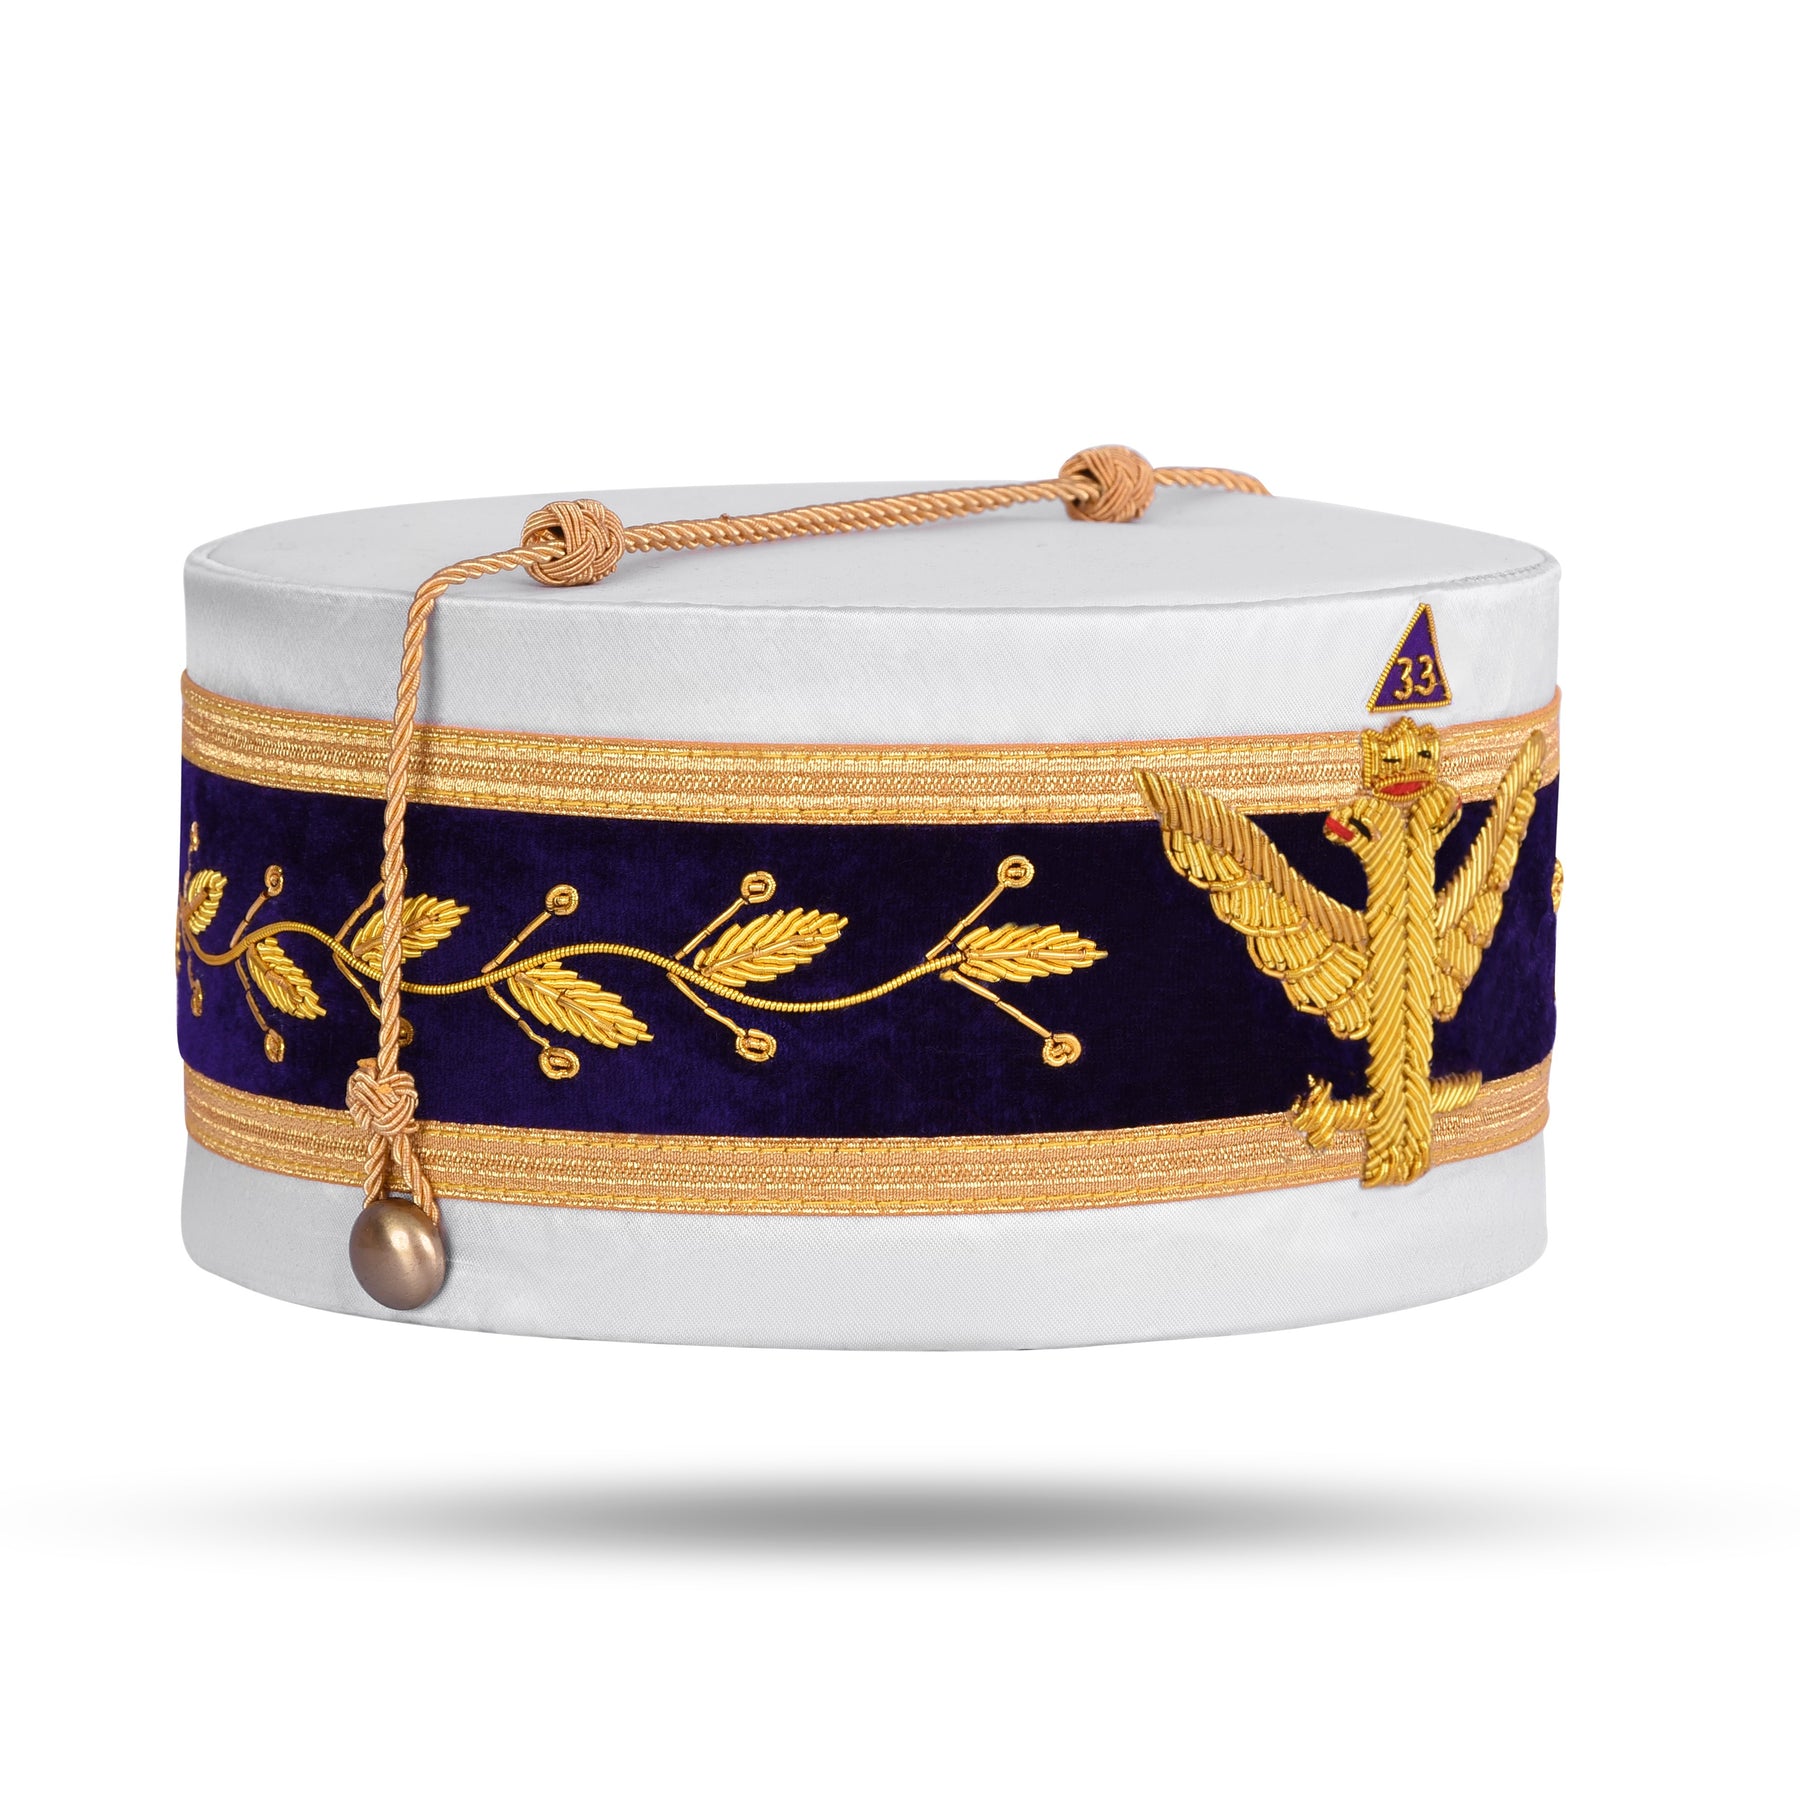 33rd Degree Scottish Rite Crown Cap - Wings Up Hand Embroidery With Gold Bullion - Bricks Masons